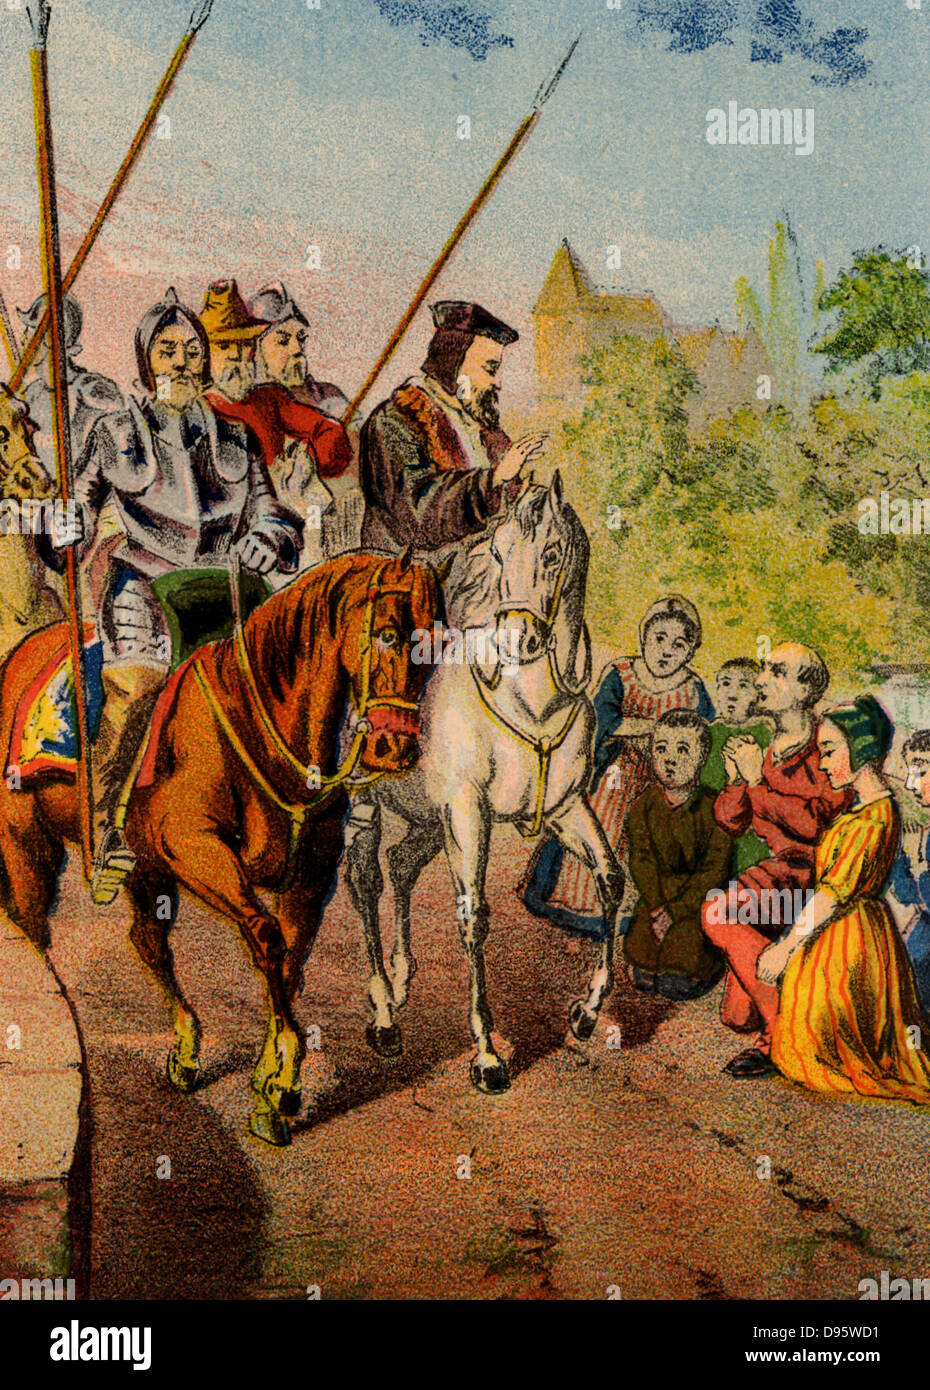 Dr Rowland Taylor (d1555) English Protestant martyr. Taylor, vicar of Hadley, Essex, arriving in the town under armed guard to await execution by burning at the stake, a victim of the persecution of Protestants under the Roman Catholic queen Mary I. Chromolithograph from a mid-19th century edition of  'Foxe's Book of Martyrs'. Stock Photo